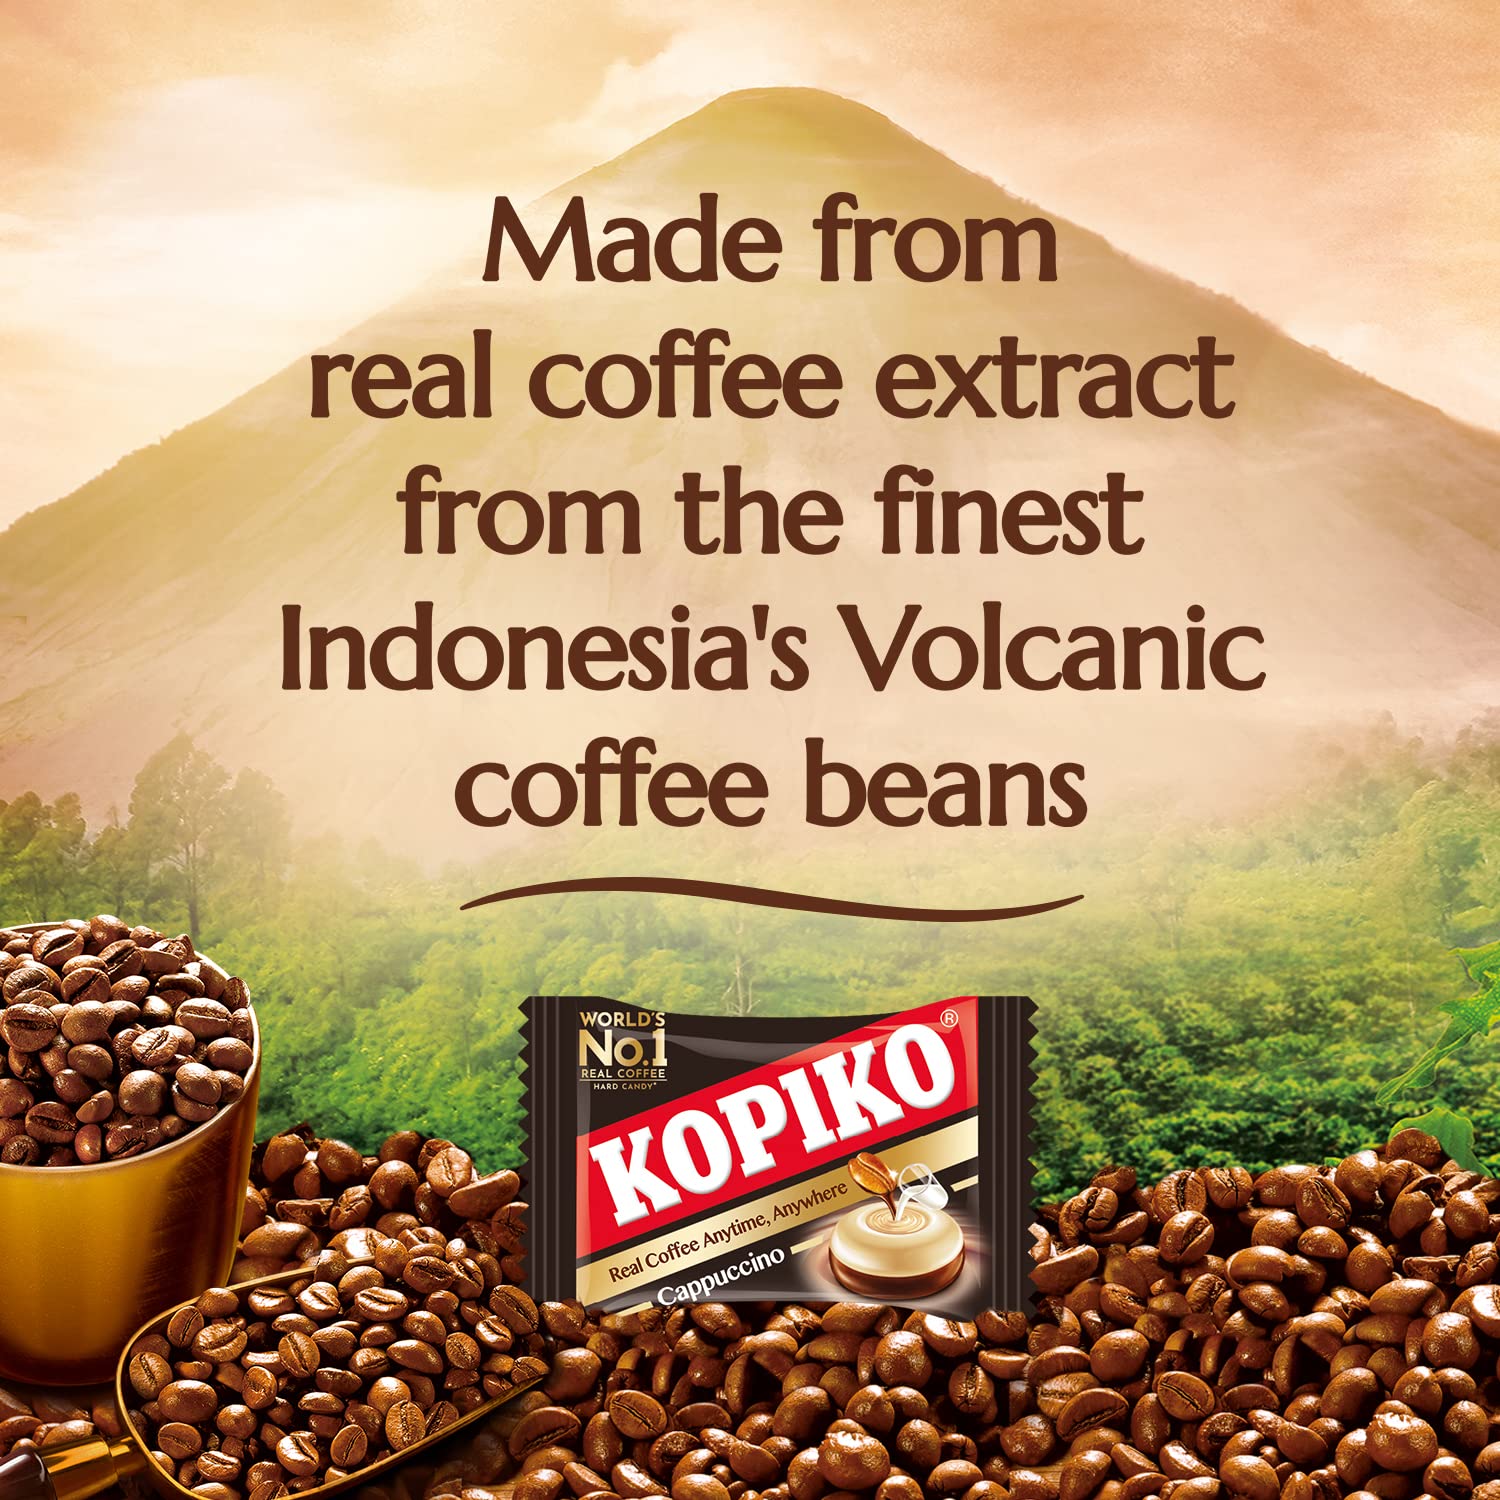 Kopiko Coffee Candy Your Take-Out Pocket Coffee for Every Occasion - Hard Candy Made from Indonesia’s Coffee Beans Contains Real Coffee Extract for Better Taste (800 gr Jar)